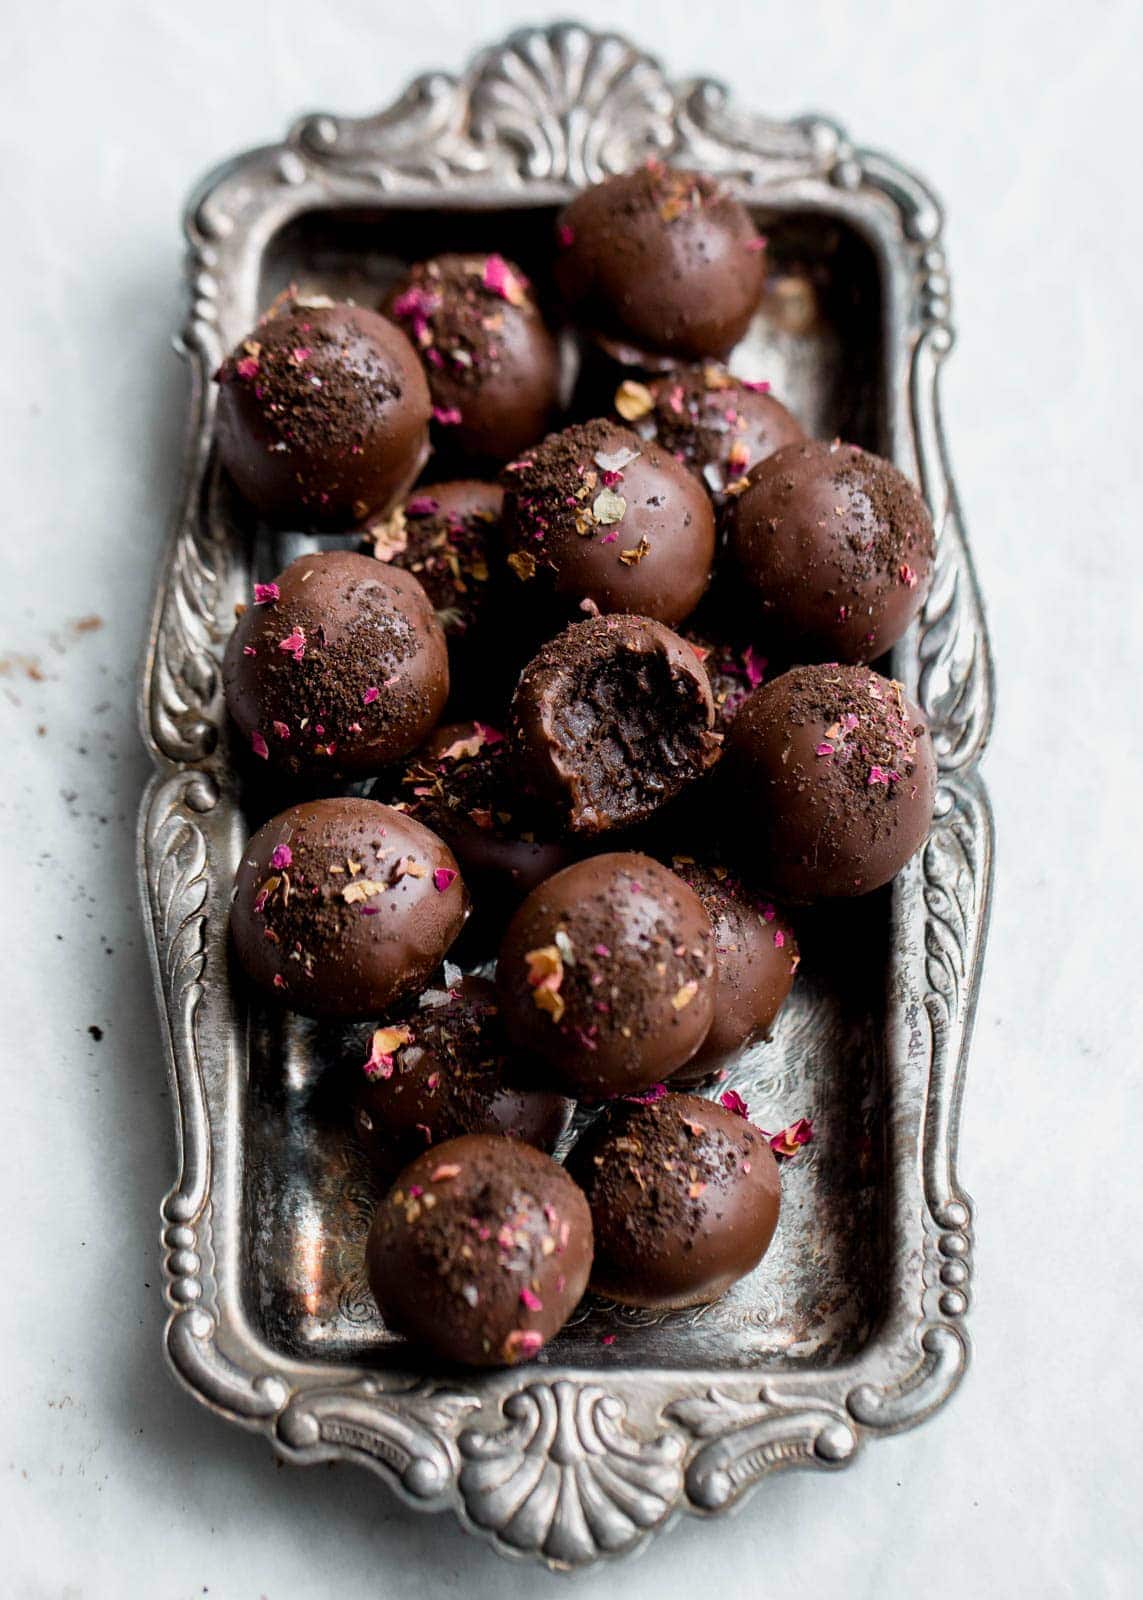 Broke Girl Truffles: just because you're broke doesn't mean you can't be luxurious.